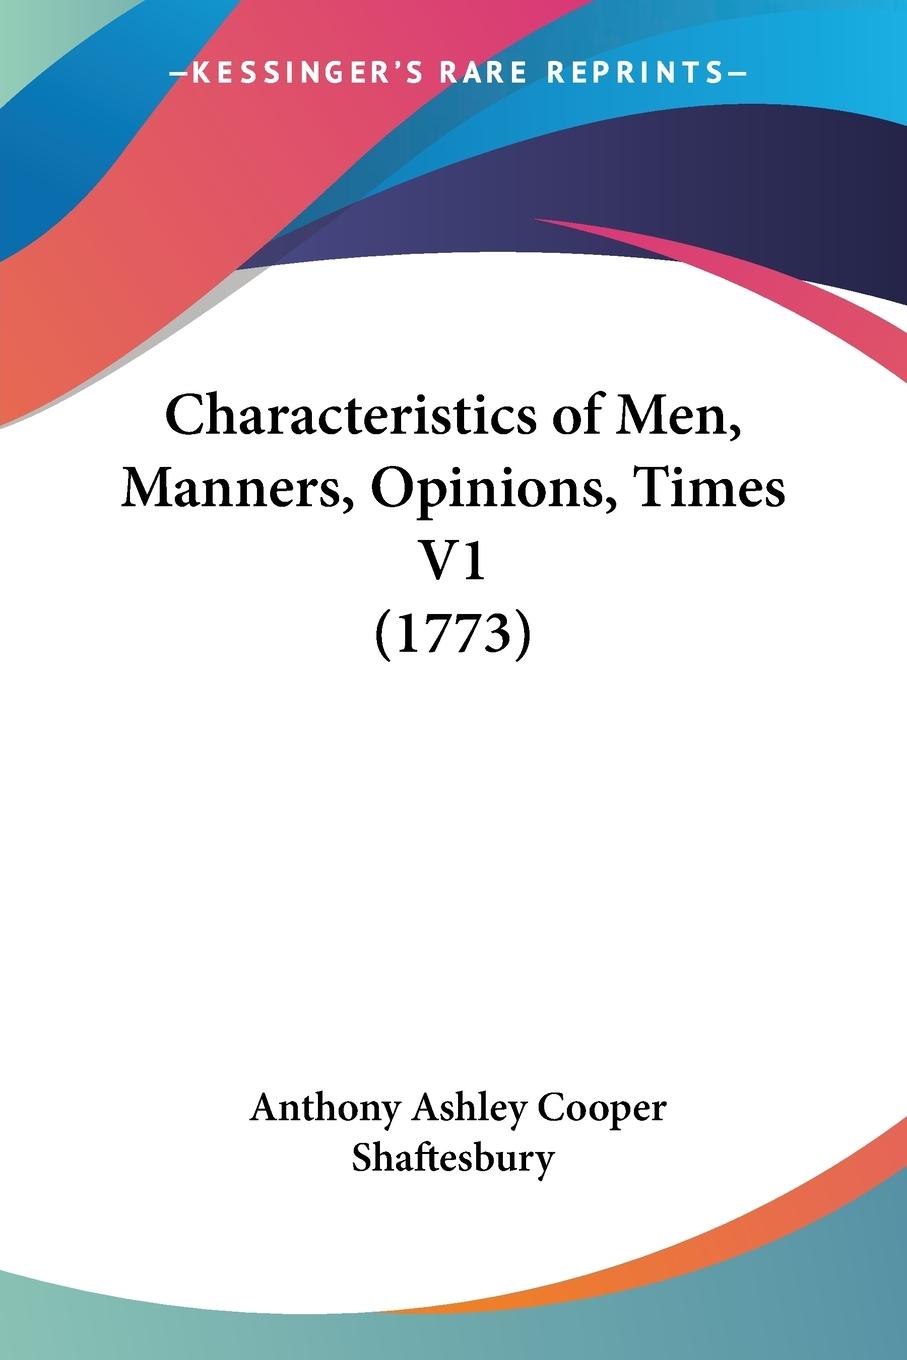 Characteristics of Men, Manners, Opinions, Times V1 (1773) - Shaftesbury, Anthony Ashley Cooper